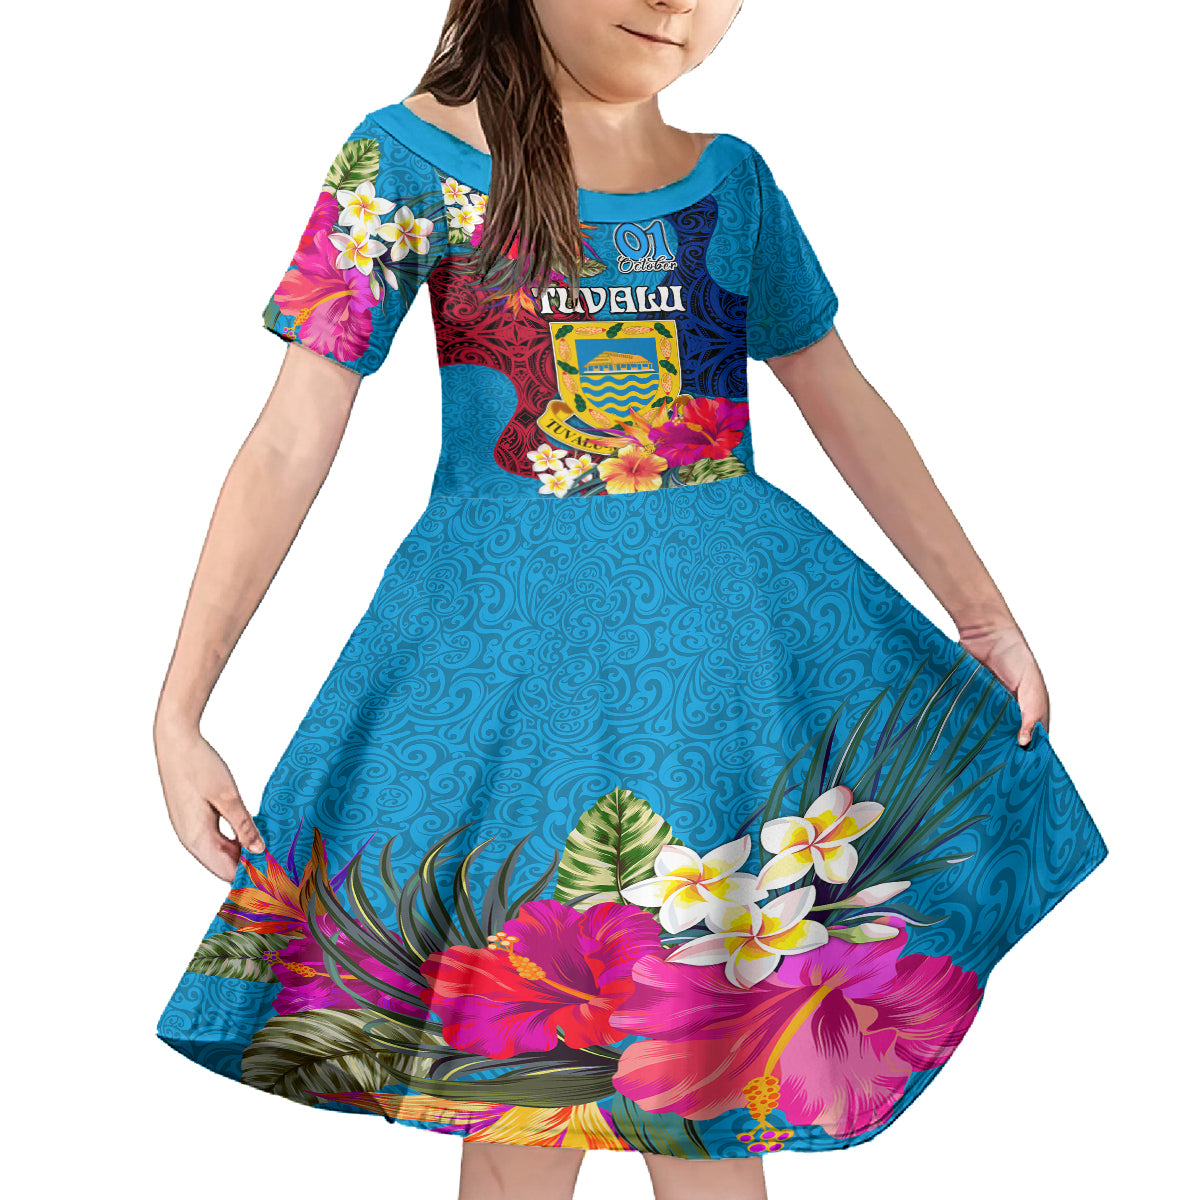 personalised-tuvalu-independence-day-kid-short-sleeve-dress-1st-october-45th-anniversary-polynesian-with-jungle-flower